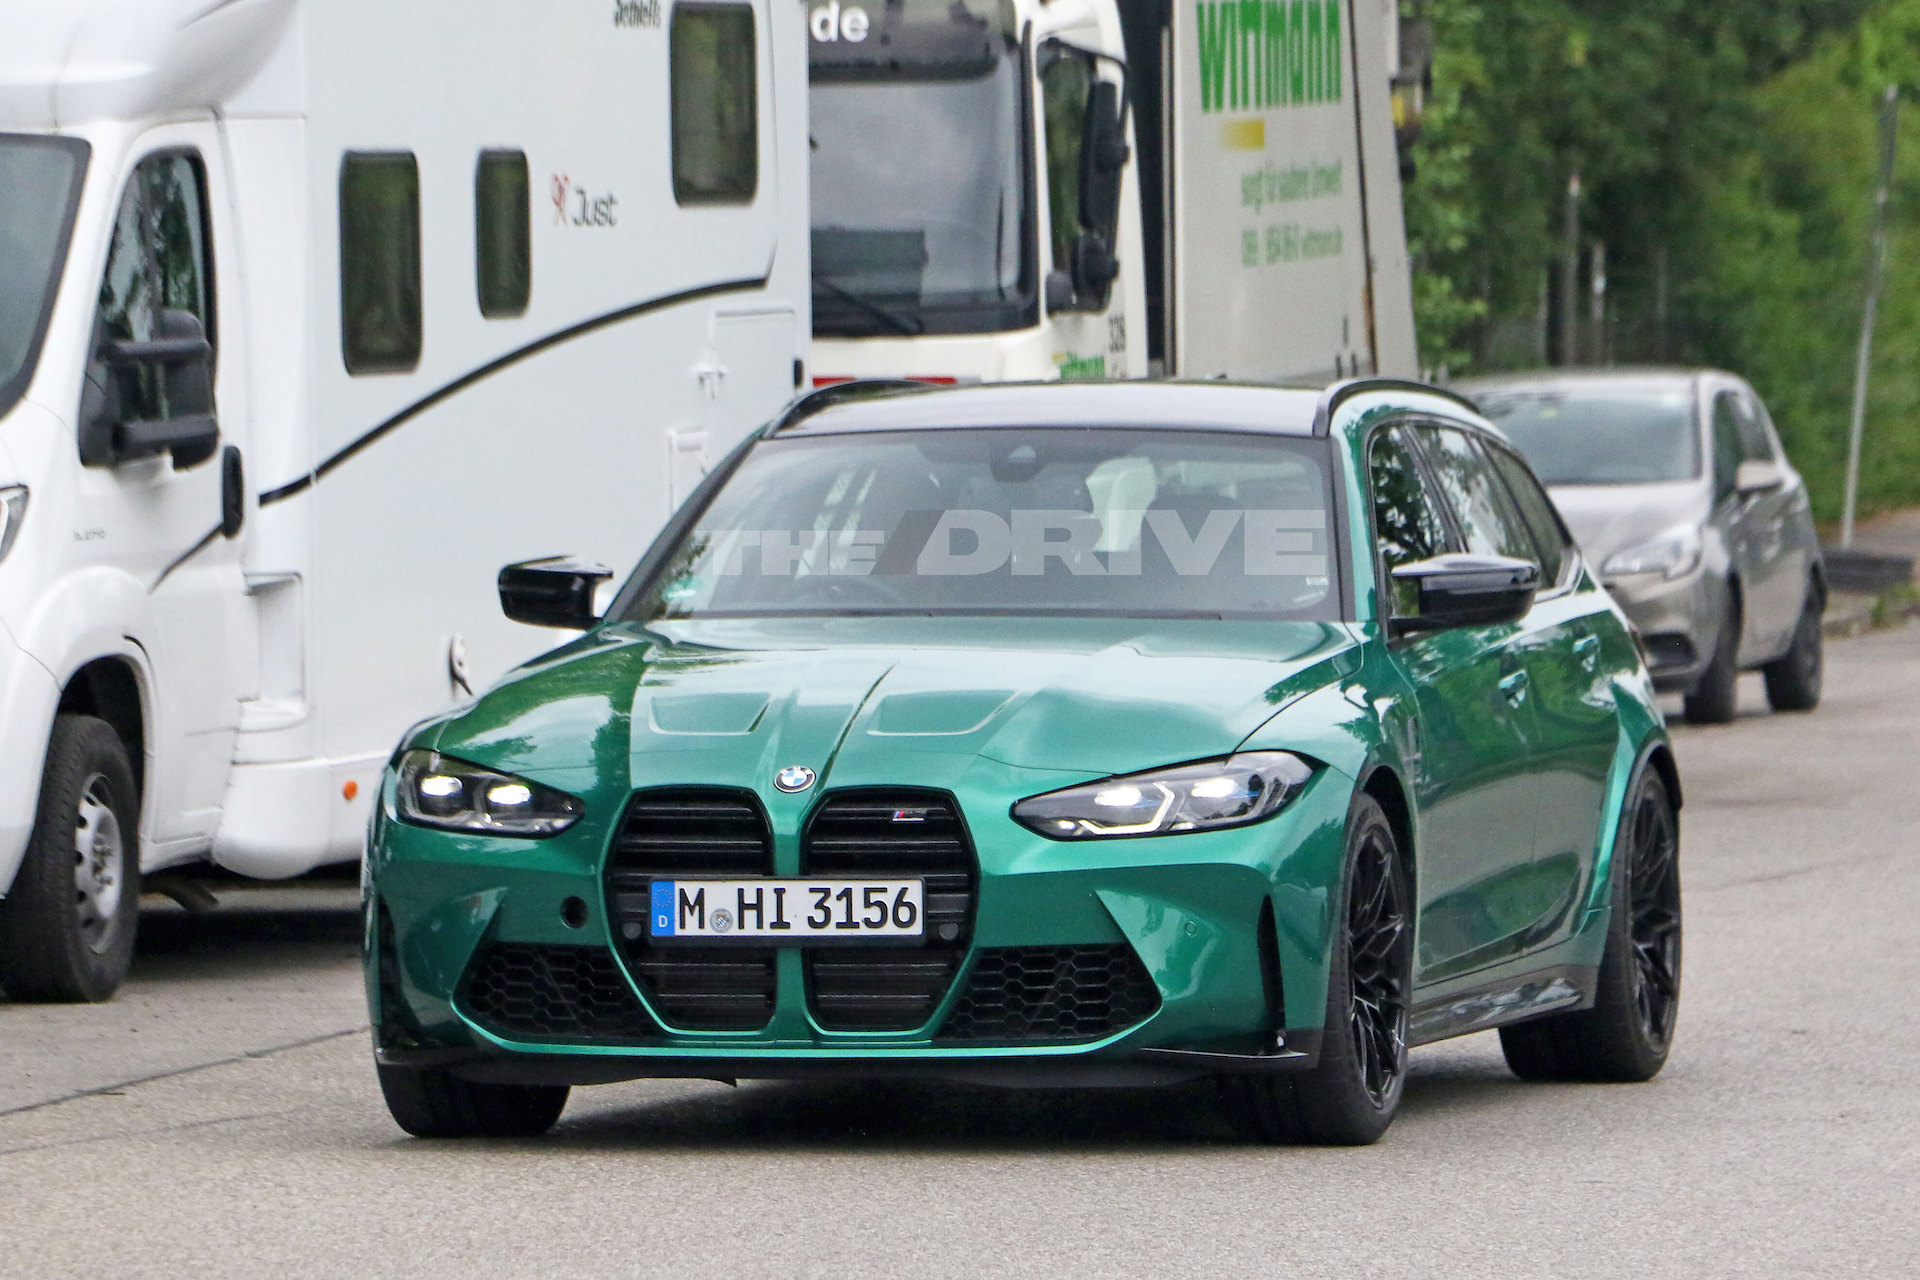 Here's the New BMW M3 Touring We Can't Have - The Car Guide